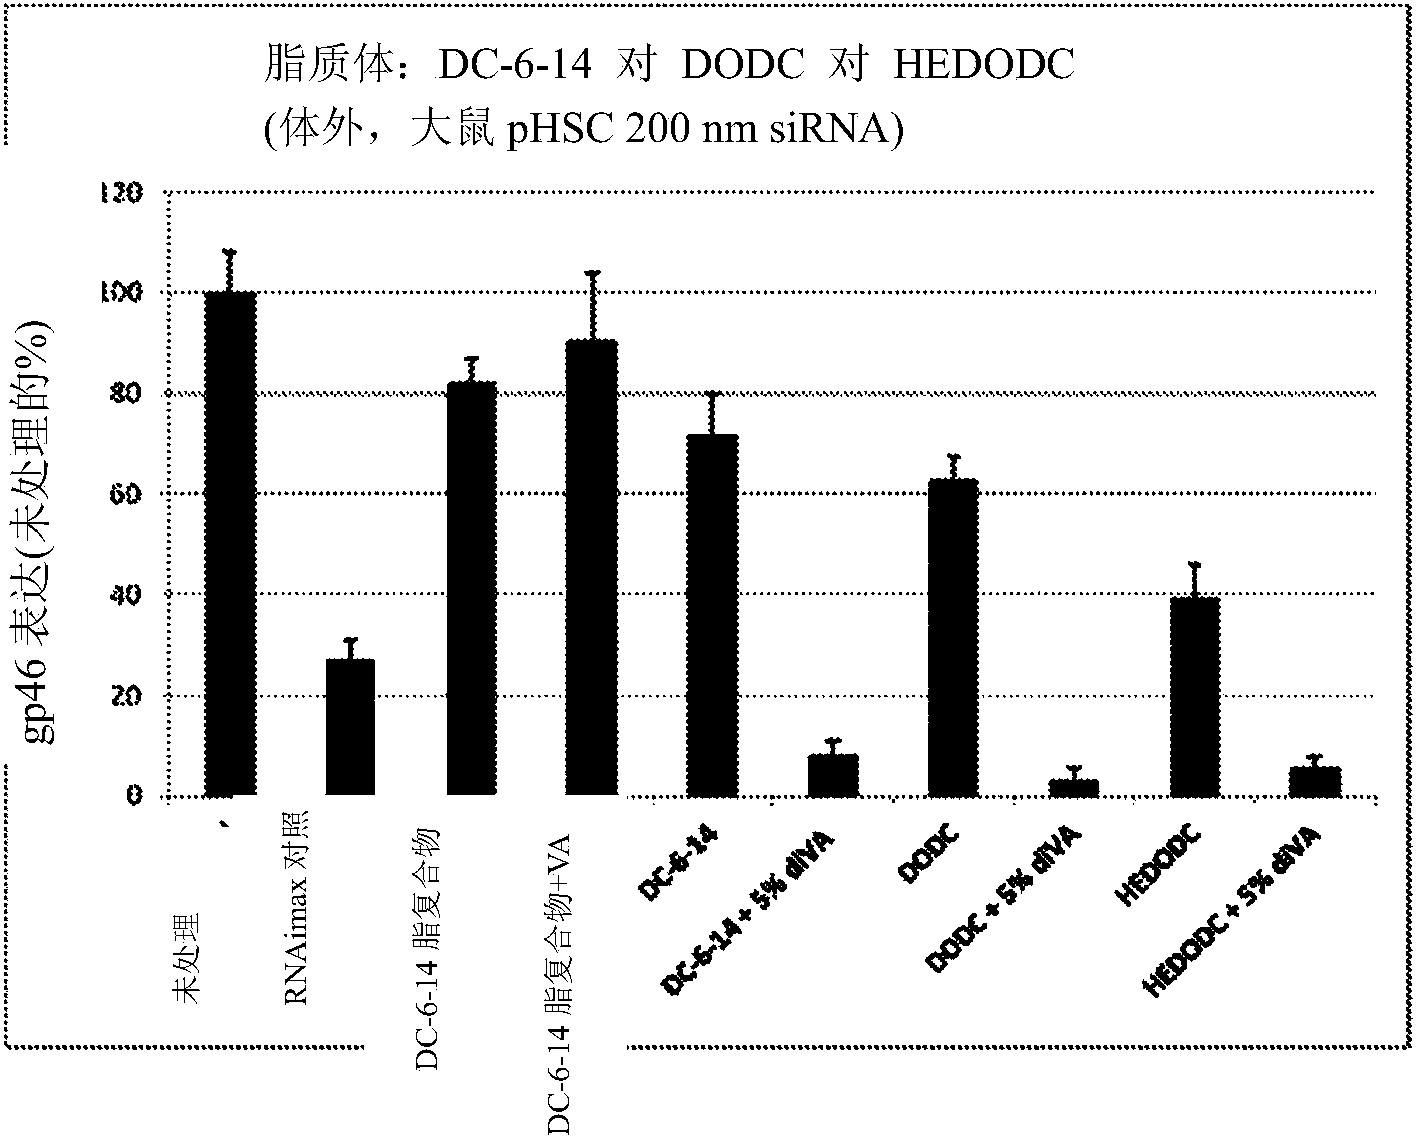 Compounds for targeting drug delivery and enhancing siRNA activity